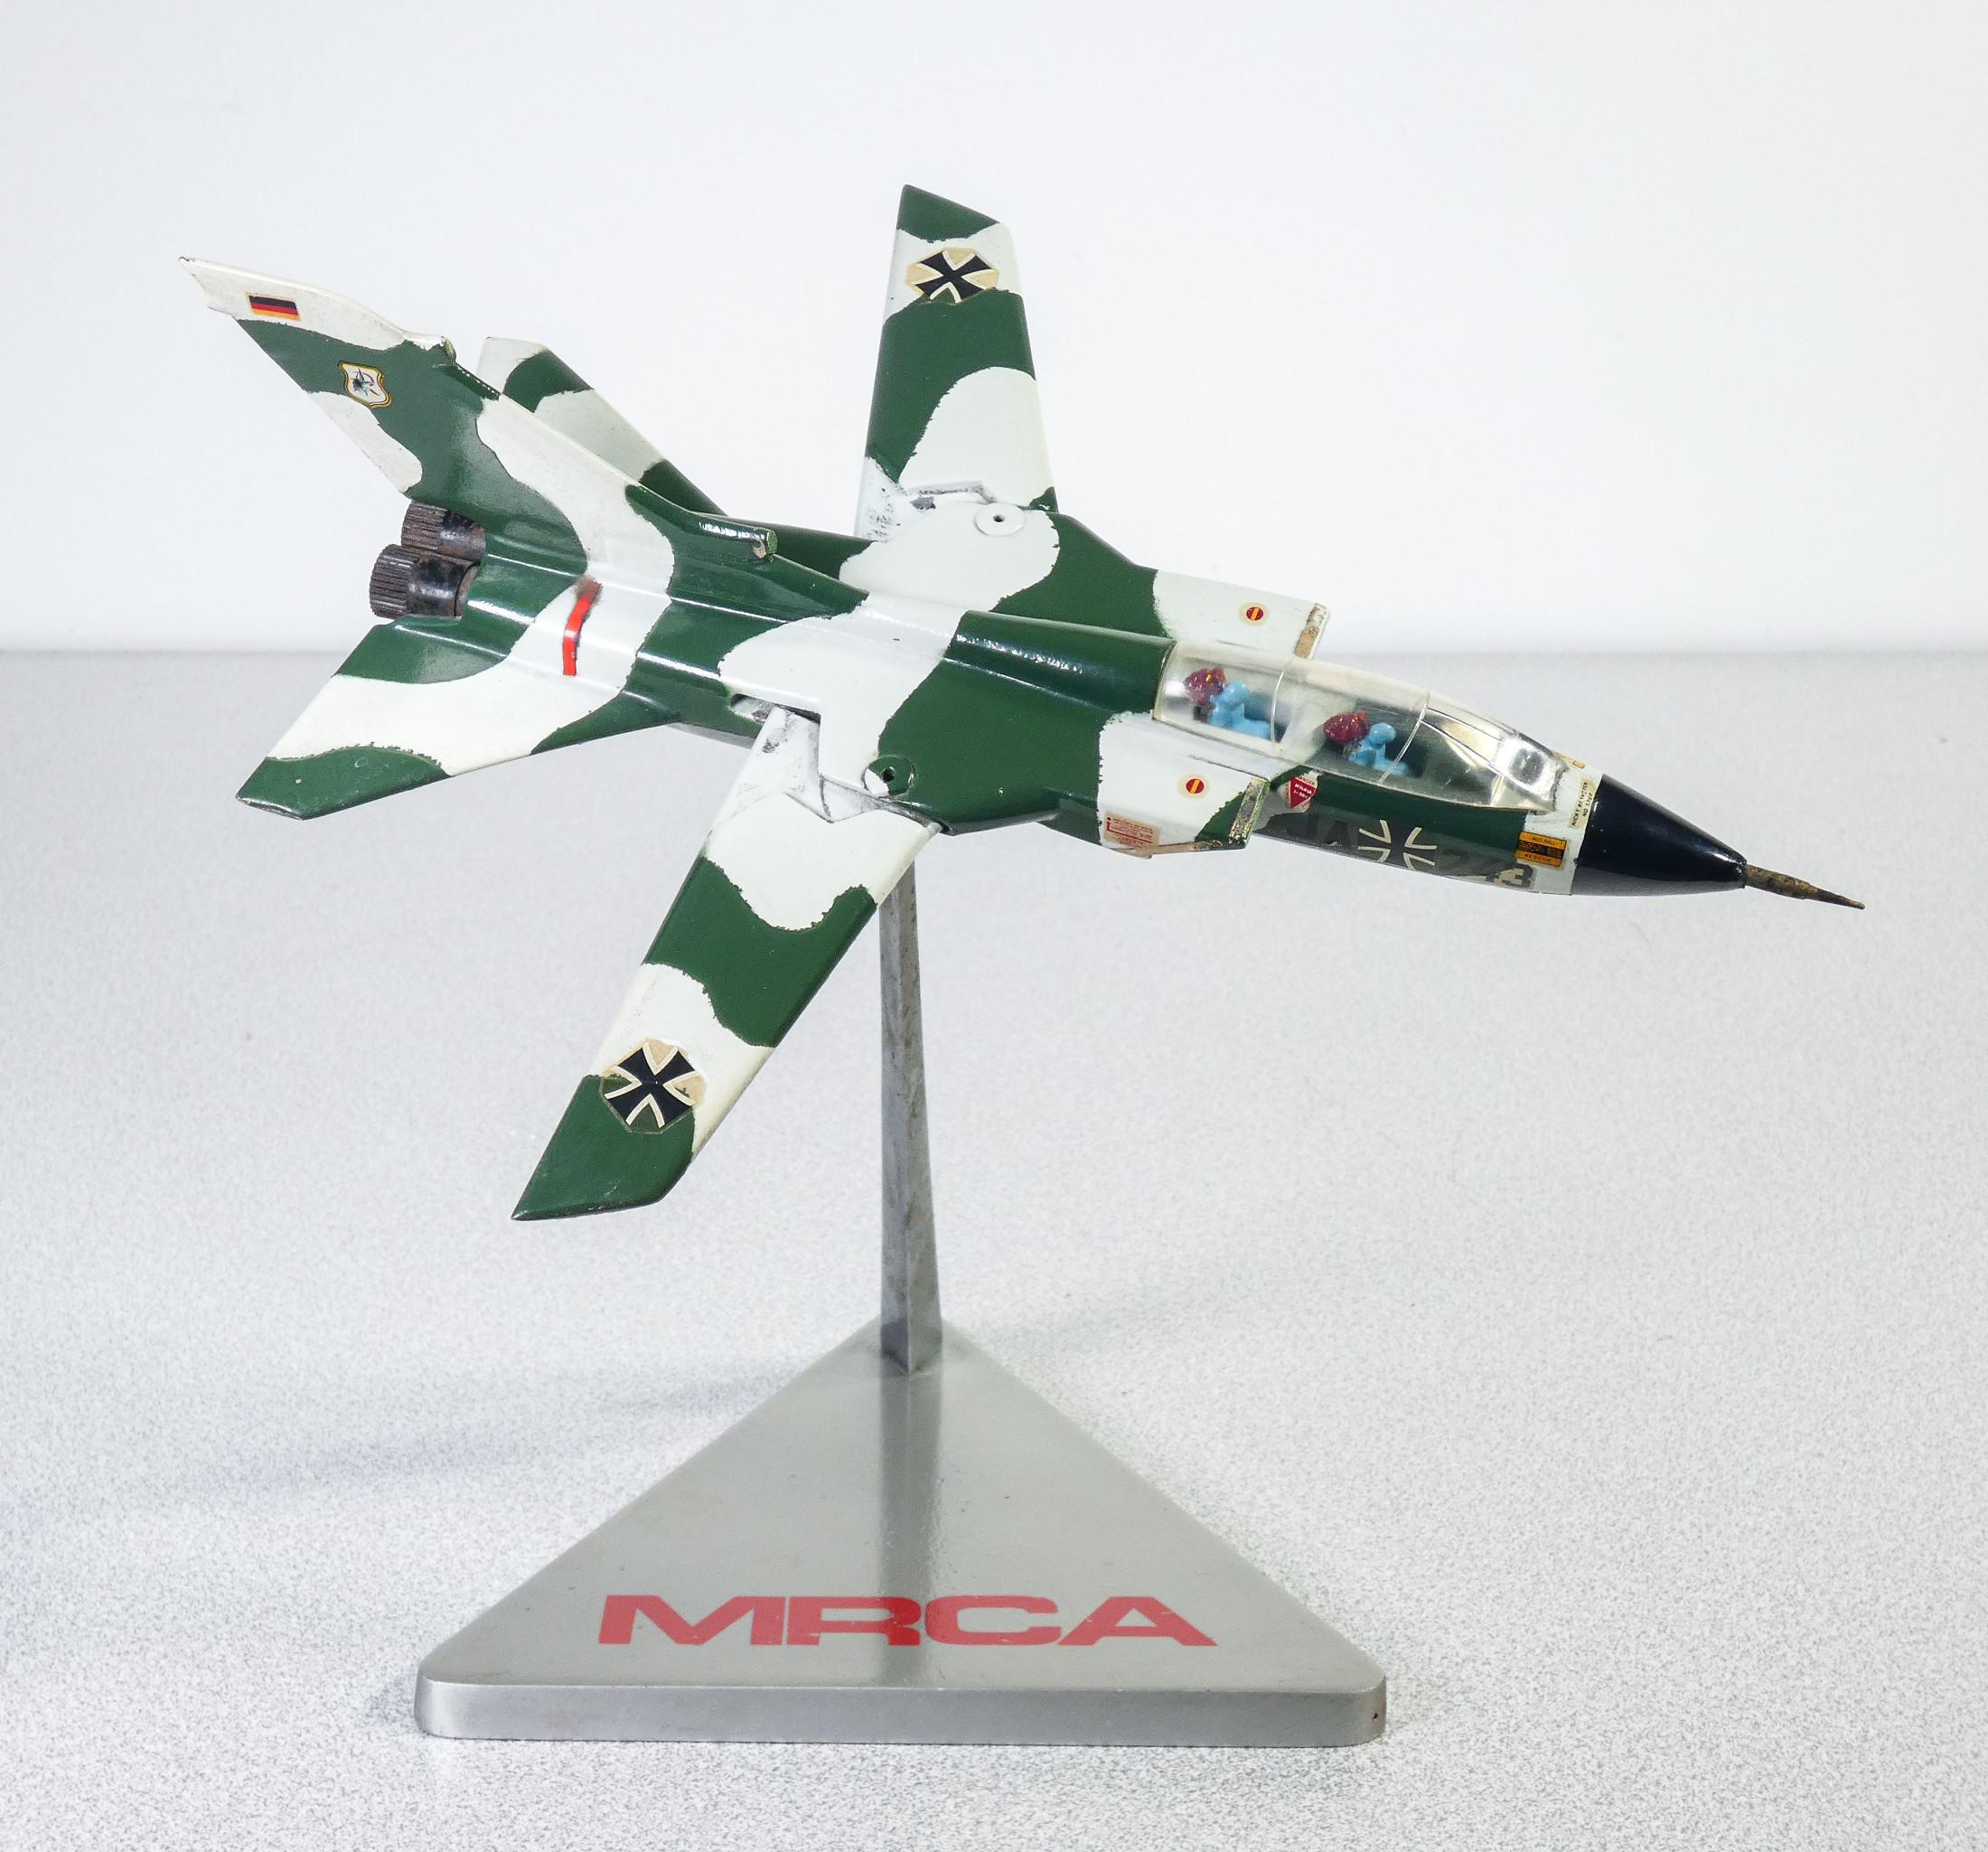 Model of
warplane
aluminum,
Panavia Tornado.
Anni 80

PERIOD
Anni 80

MATERIALS
Molded aluminum,
with stickers

DIMENSIONS
Length 24.5 cm
Width 12.5/20 cm
H tot approx 24 cm

CONDITIONS
The model is in very good condition, as is easy to see from the